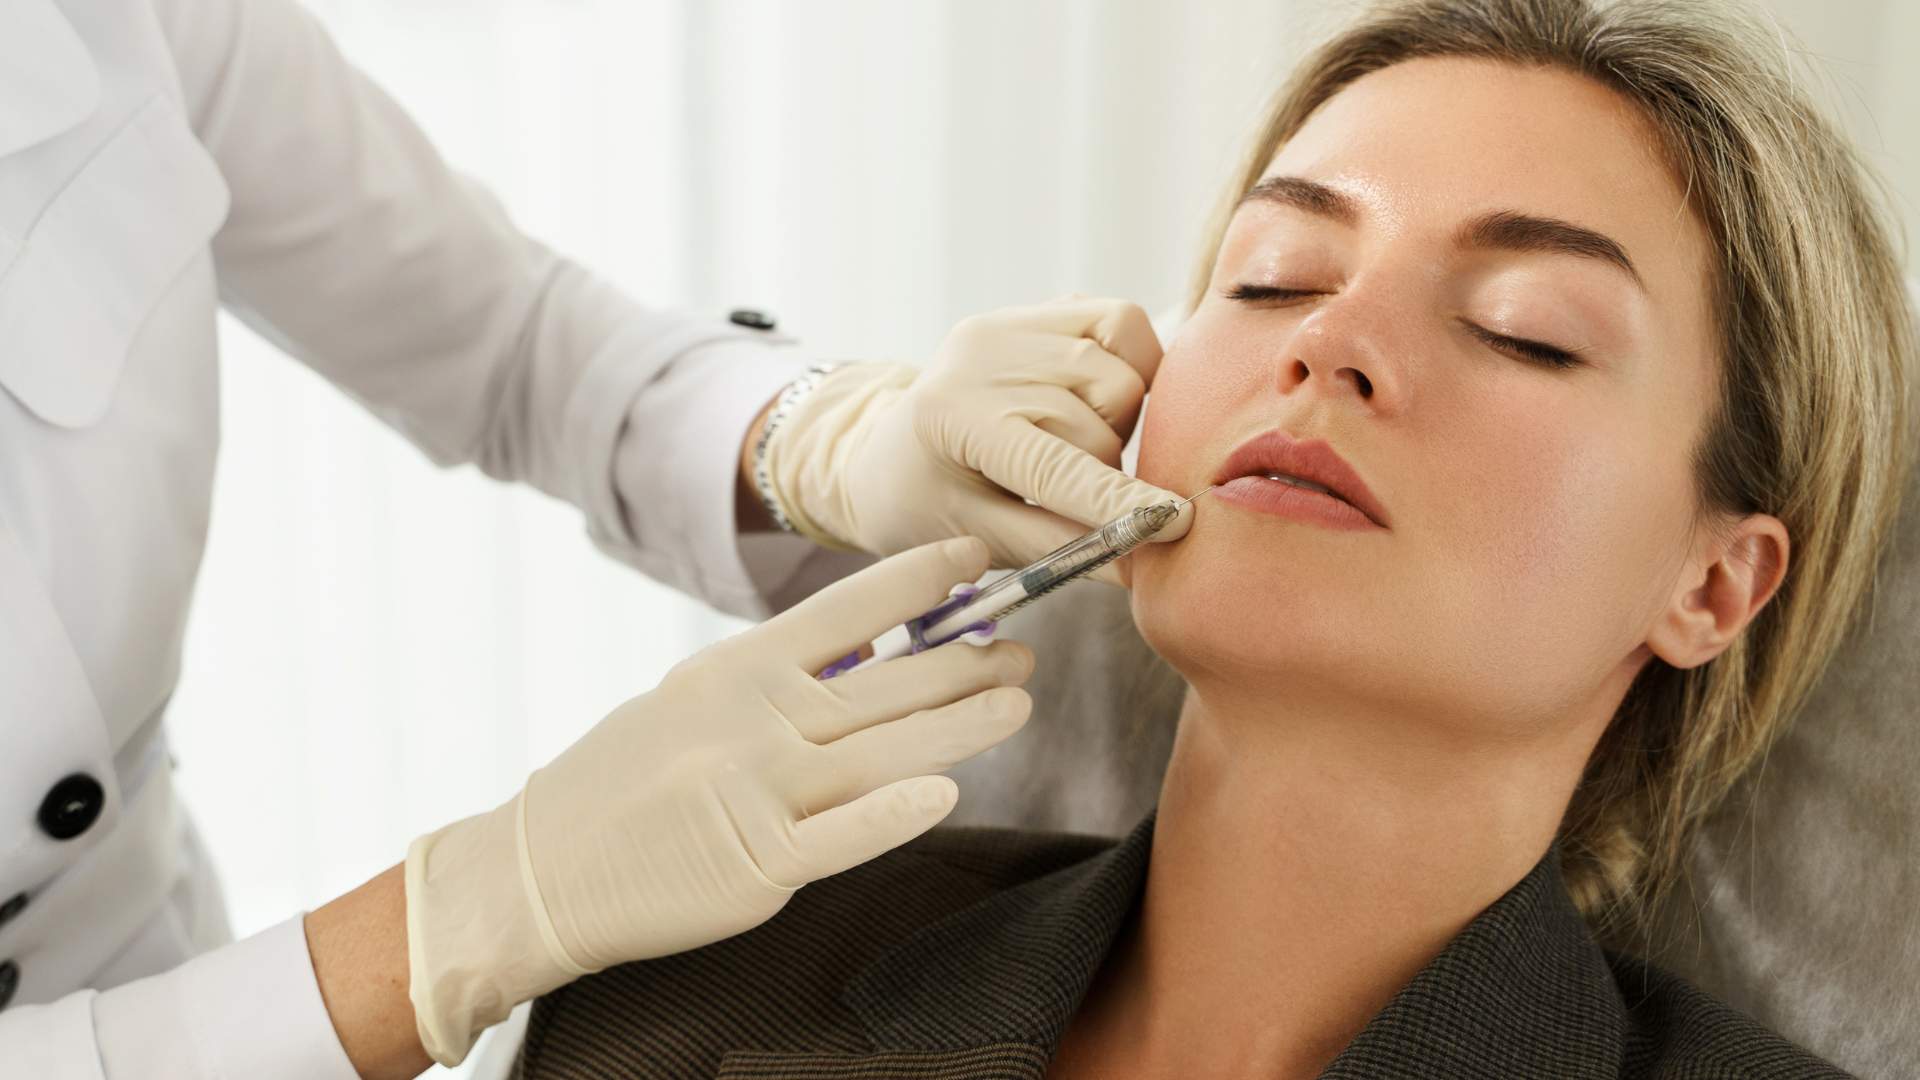 Woman during Facial Filler Injections in Aesthetic Medical Clinical